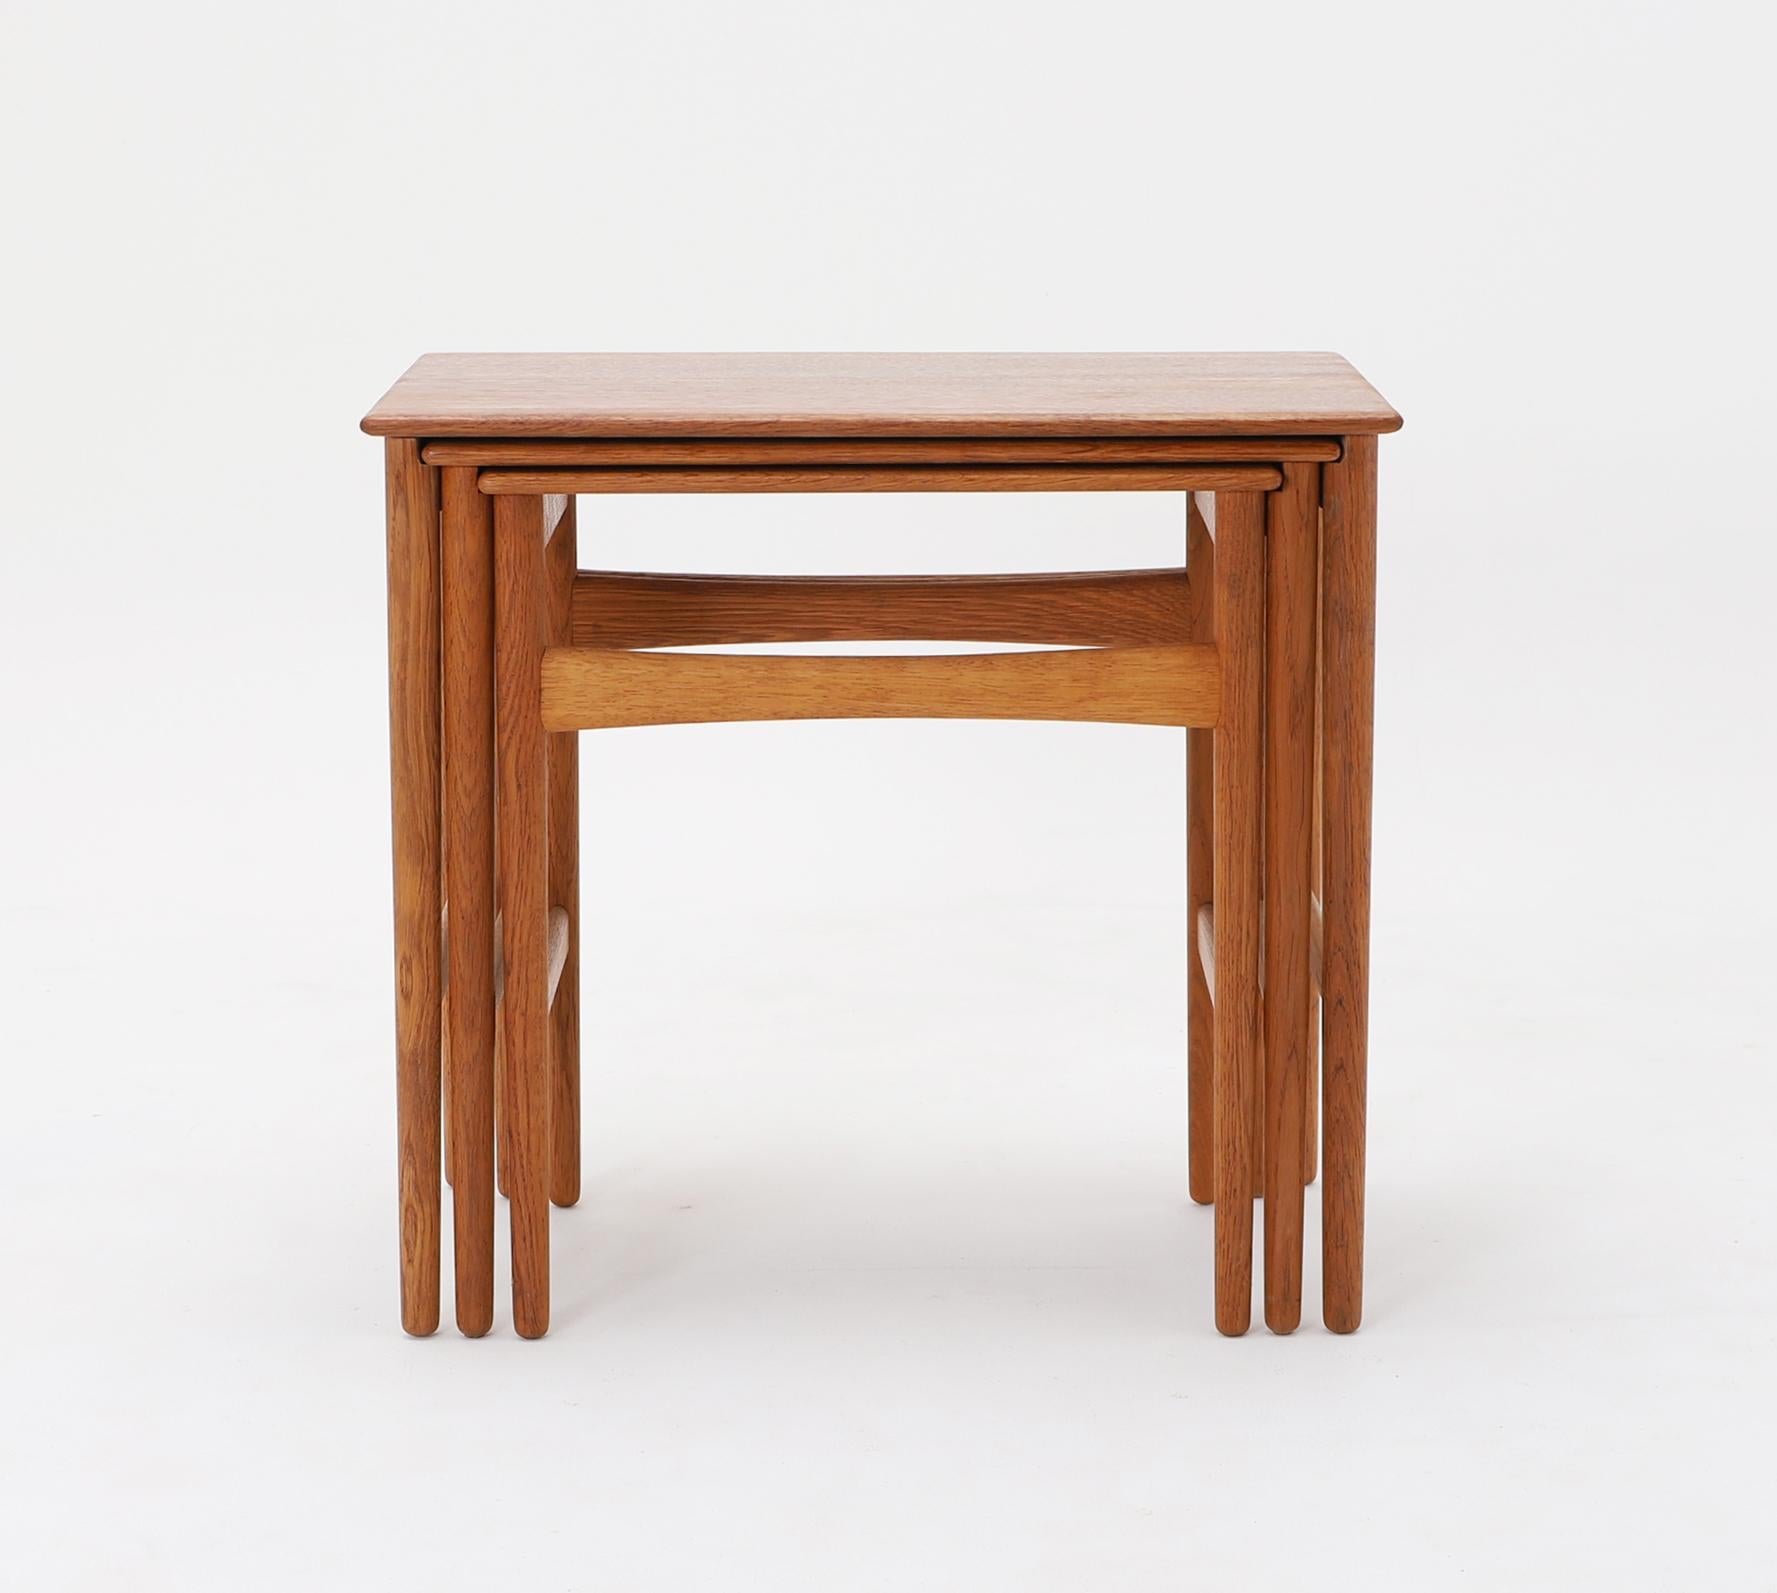 Nesting table AT-40 designed by Hans Wegner.

The item is in good condition.
There is a stamp of Made in Denmark on the back of the smallest table.

Large) W520×D335×H480 (mm)
Middle) W445×D310×H465 (mm)
Small) W400×D290×H450 (mm)
